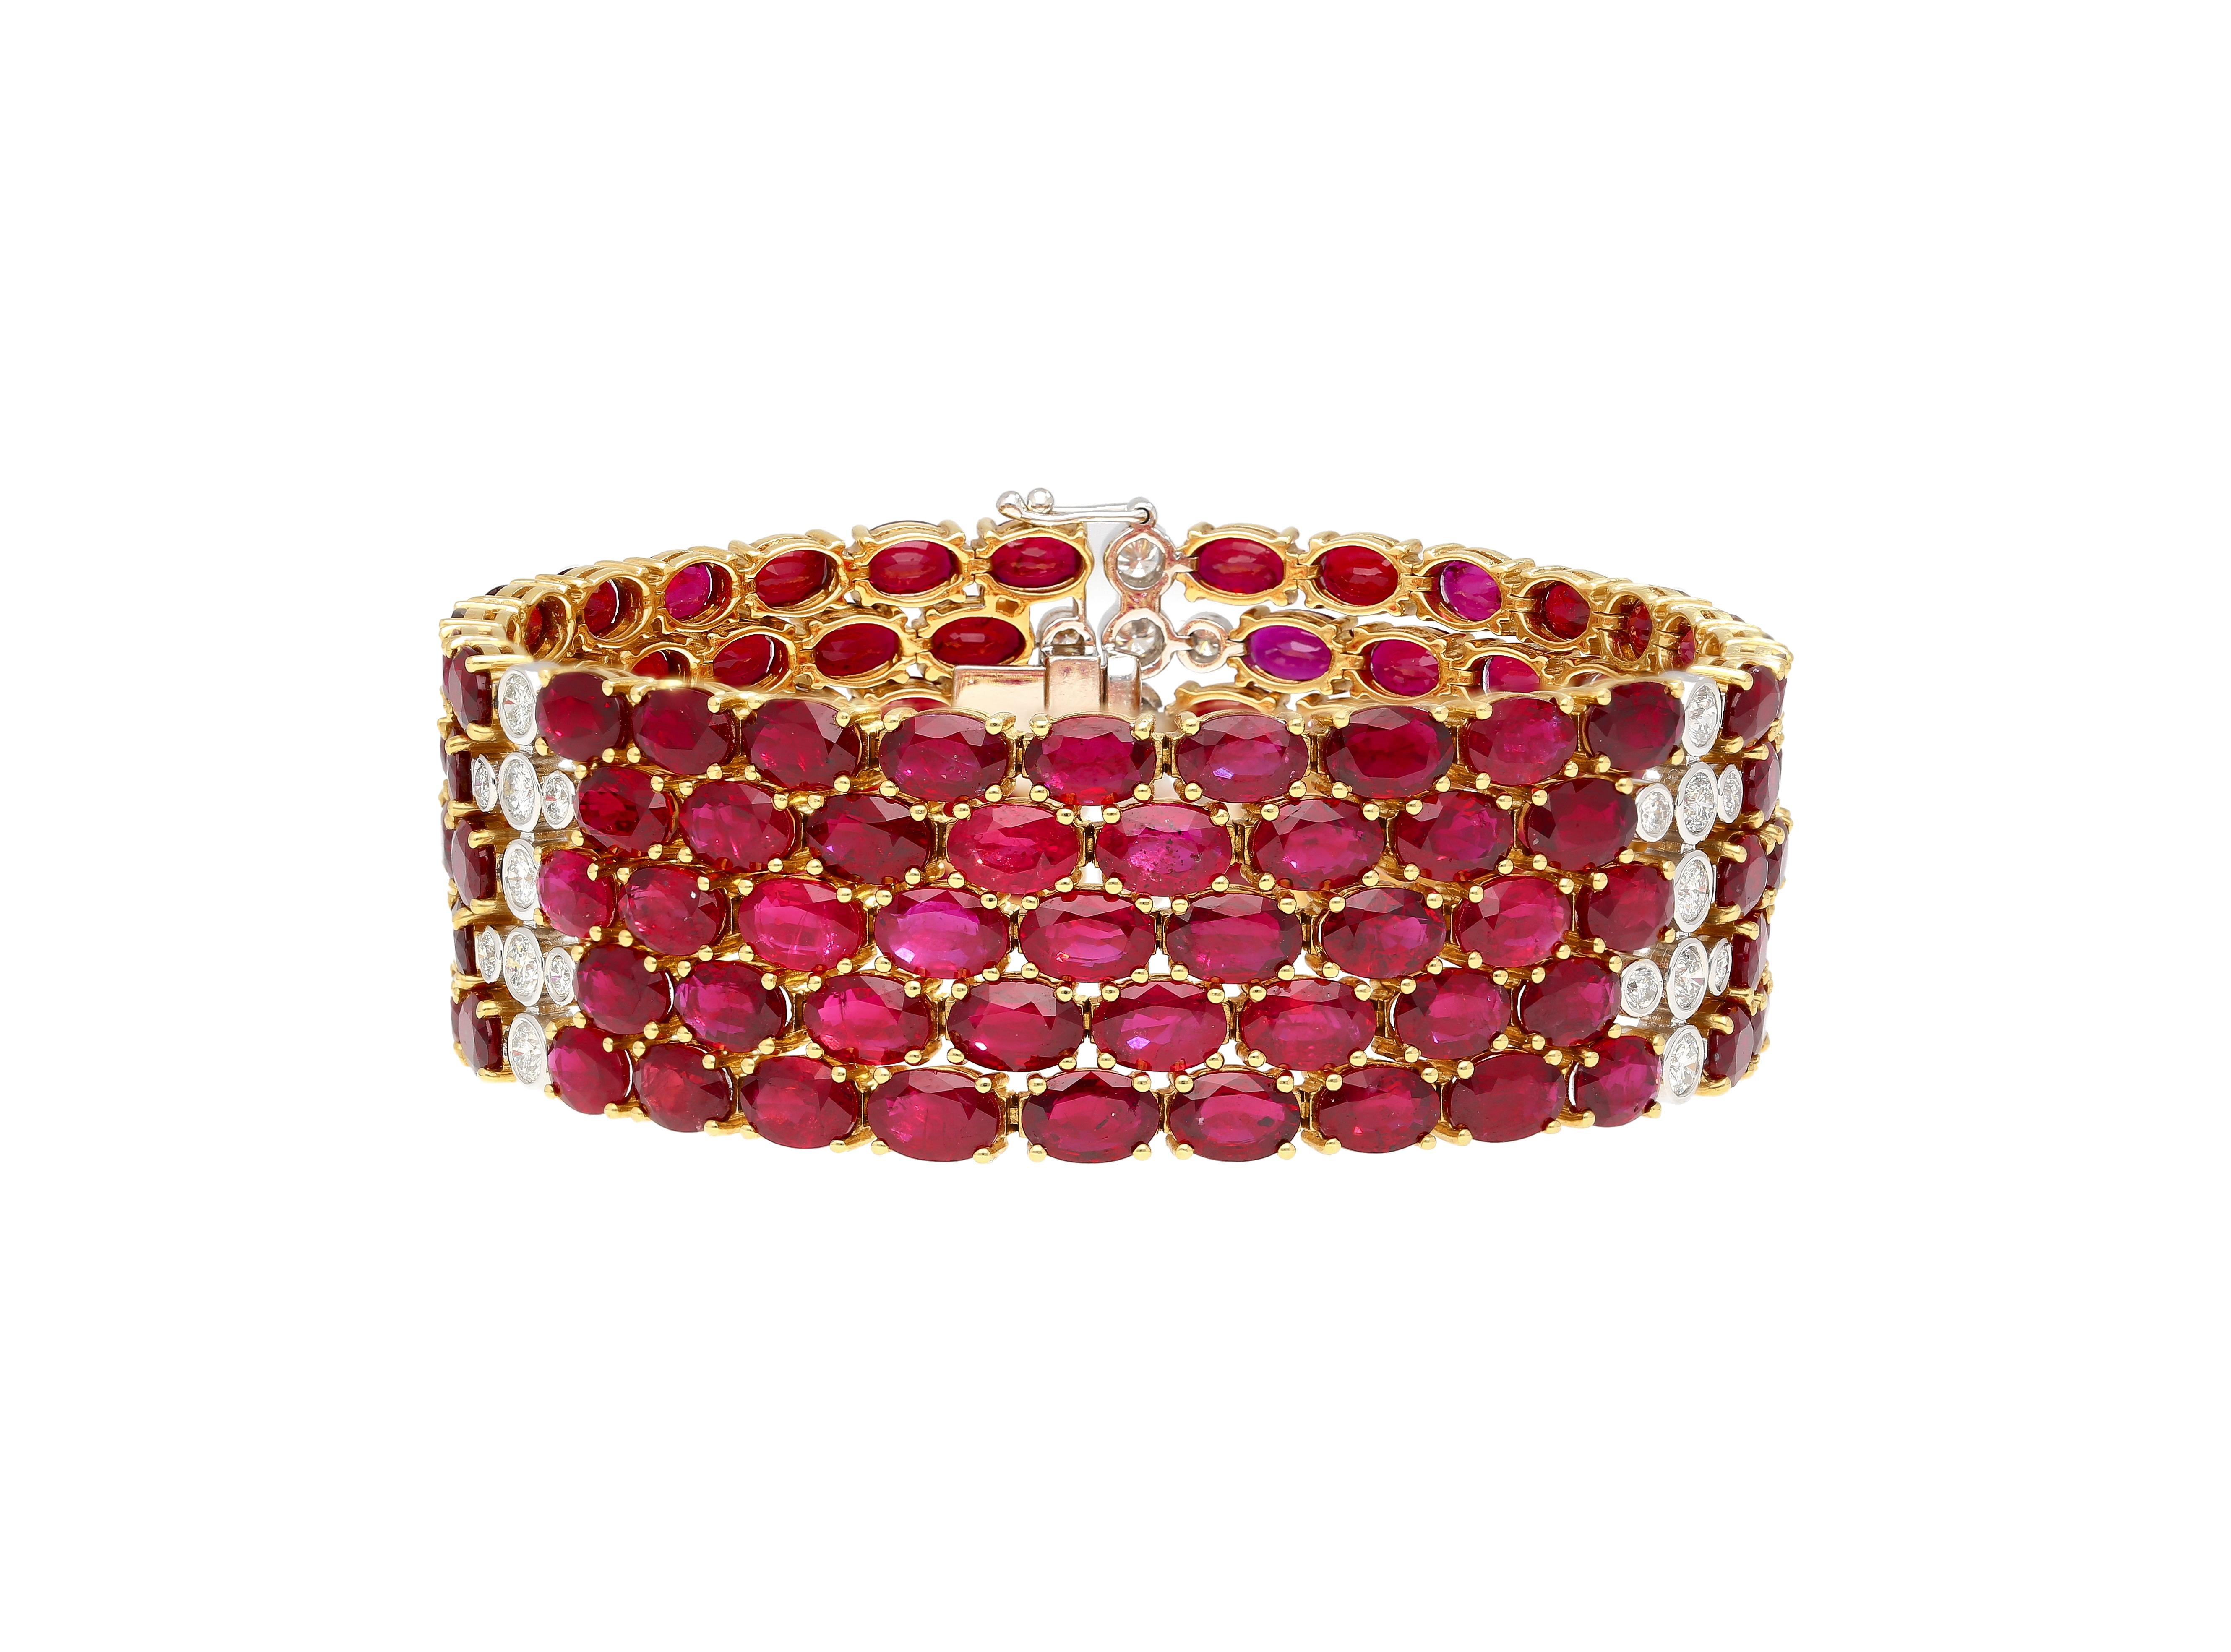 18K yellow gold multi row link tennis bracelet, weighing 45.36 grams. Featuring an astounding 72.51 Carats of natural oval cut rubies, a breathtaking total of 128 stones, each radiating a deep and alluring red hue, meticulously prong-set in yellow